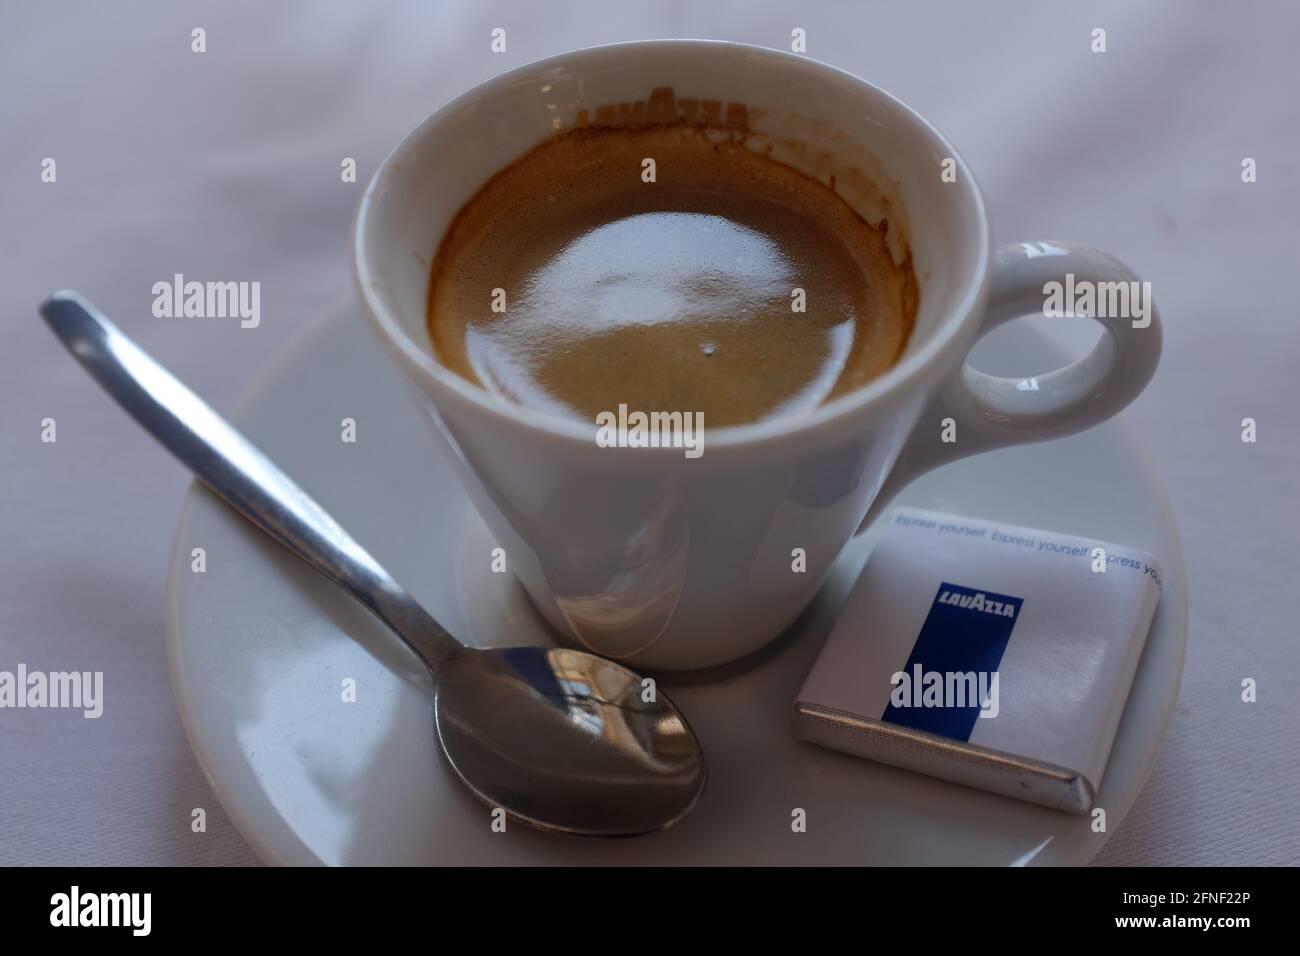 https://c8.alamy.com/comp/2FNF22P/cup-of-lavazza-espresso-coffee-in-toulouse-haute-garonne-occitanie-south-of-france-2FNF22P.jpg